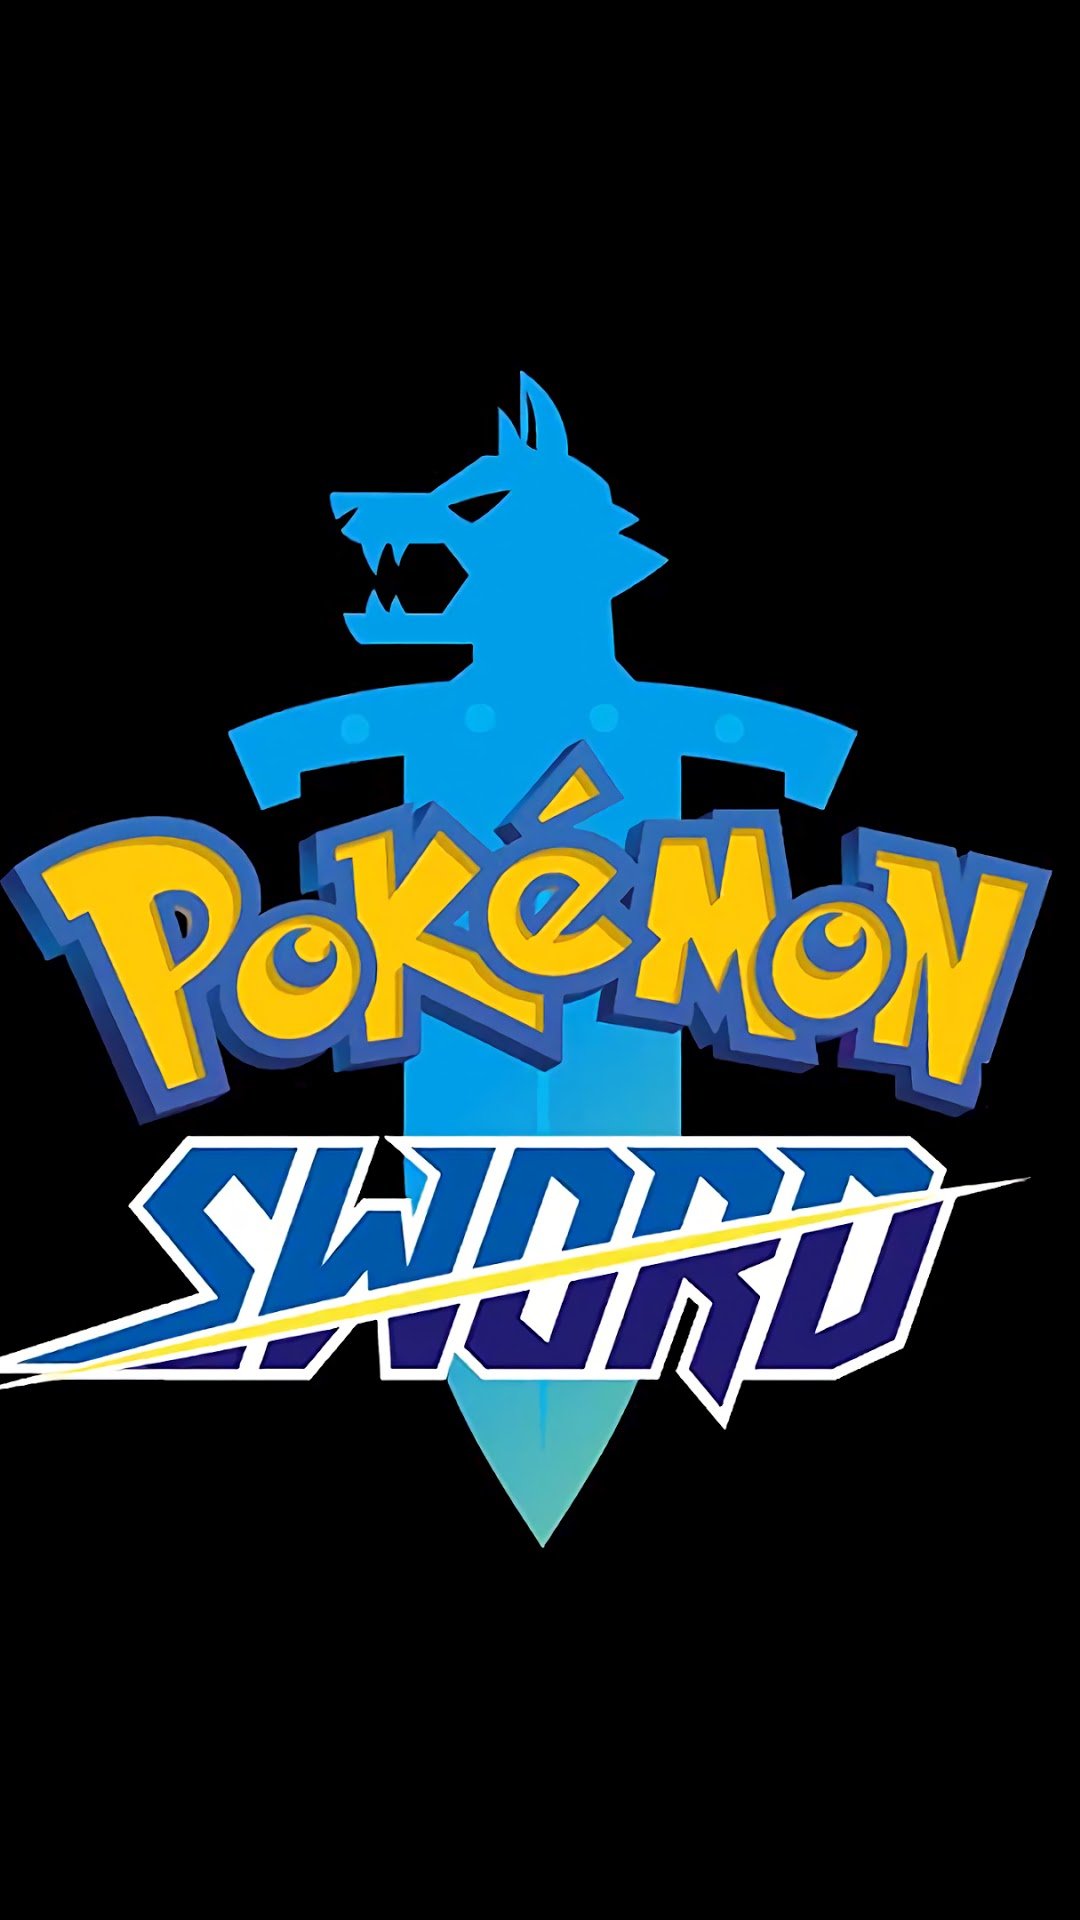 Pokemon Sword, Logo phone HD Wallpaper, Image, Background, Photo and Picture HD Wallpaper